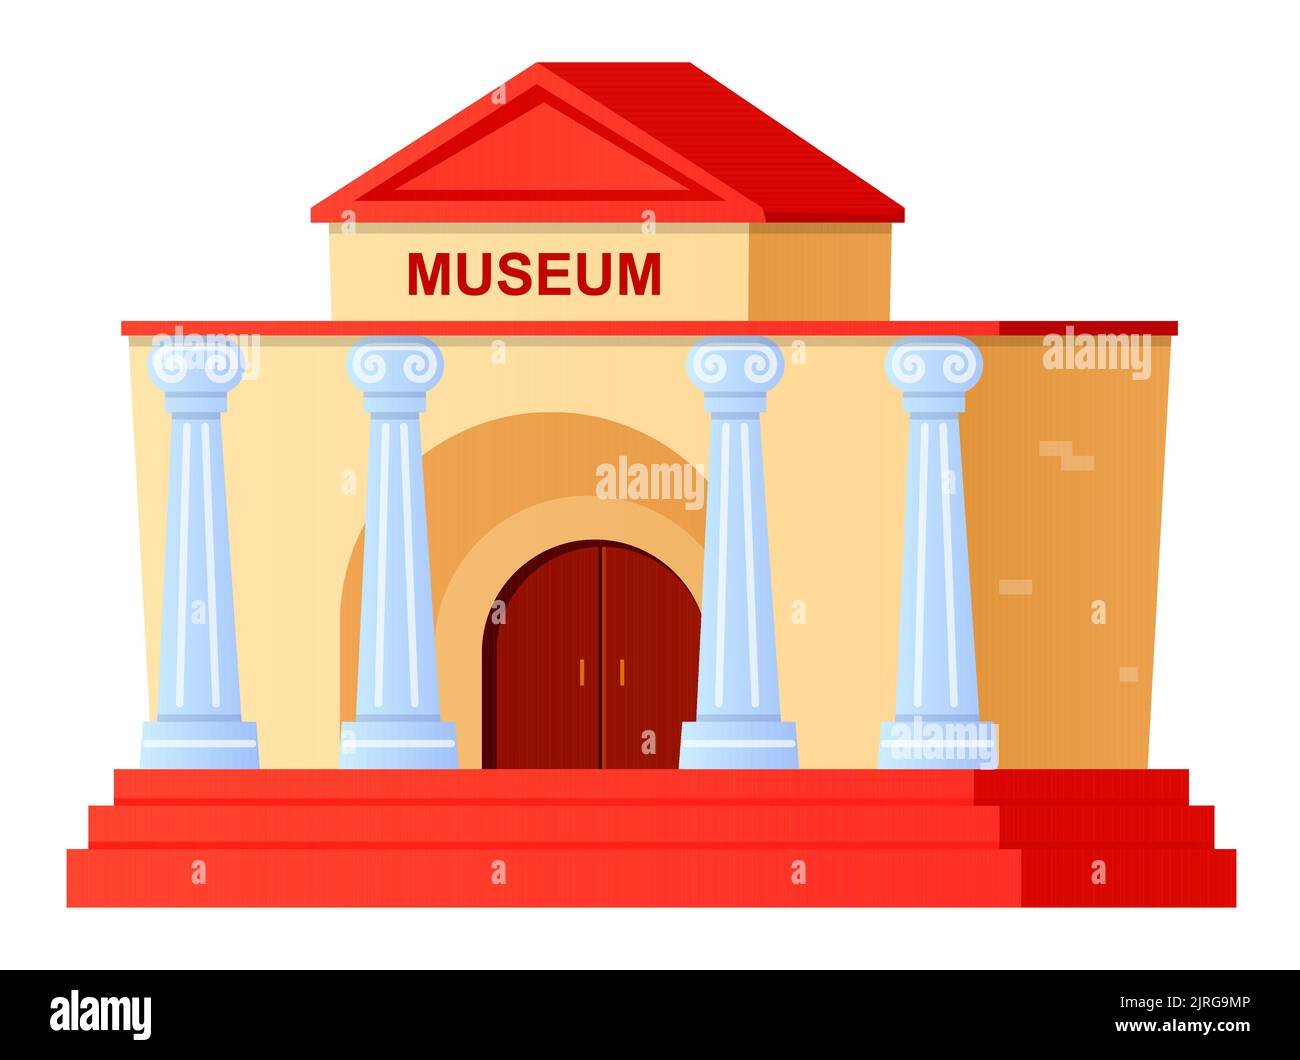 Historical Museum - modern flat design style single isolated image Stock Vector